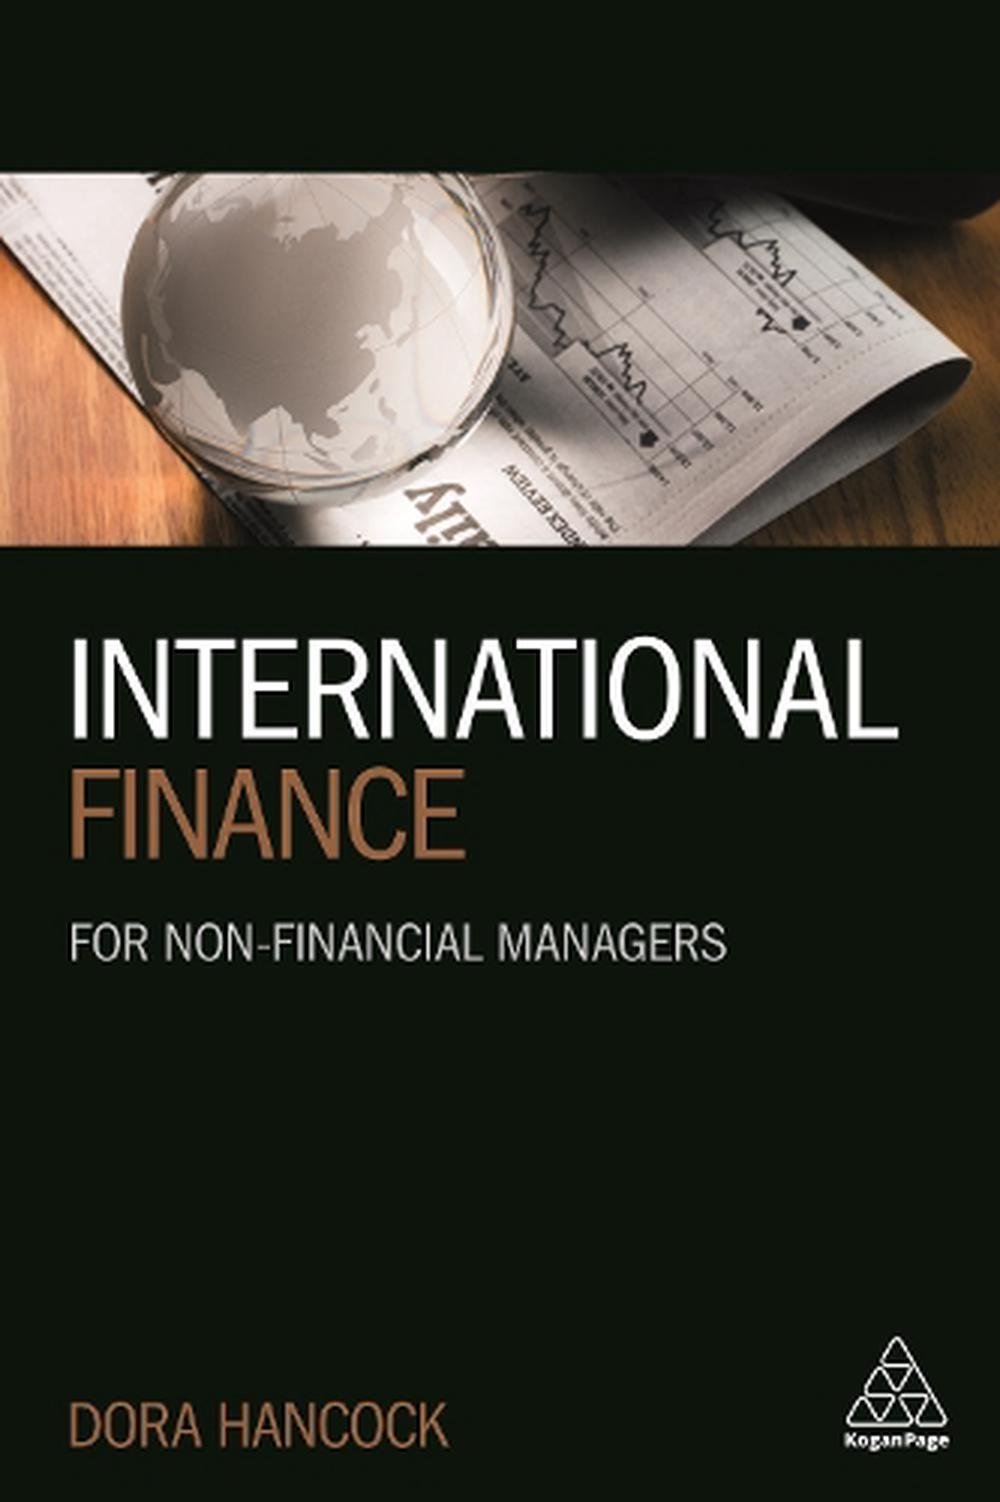 thesis about international finance